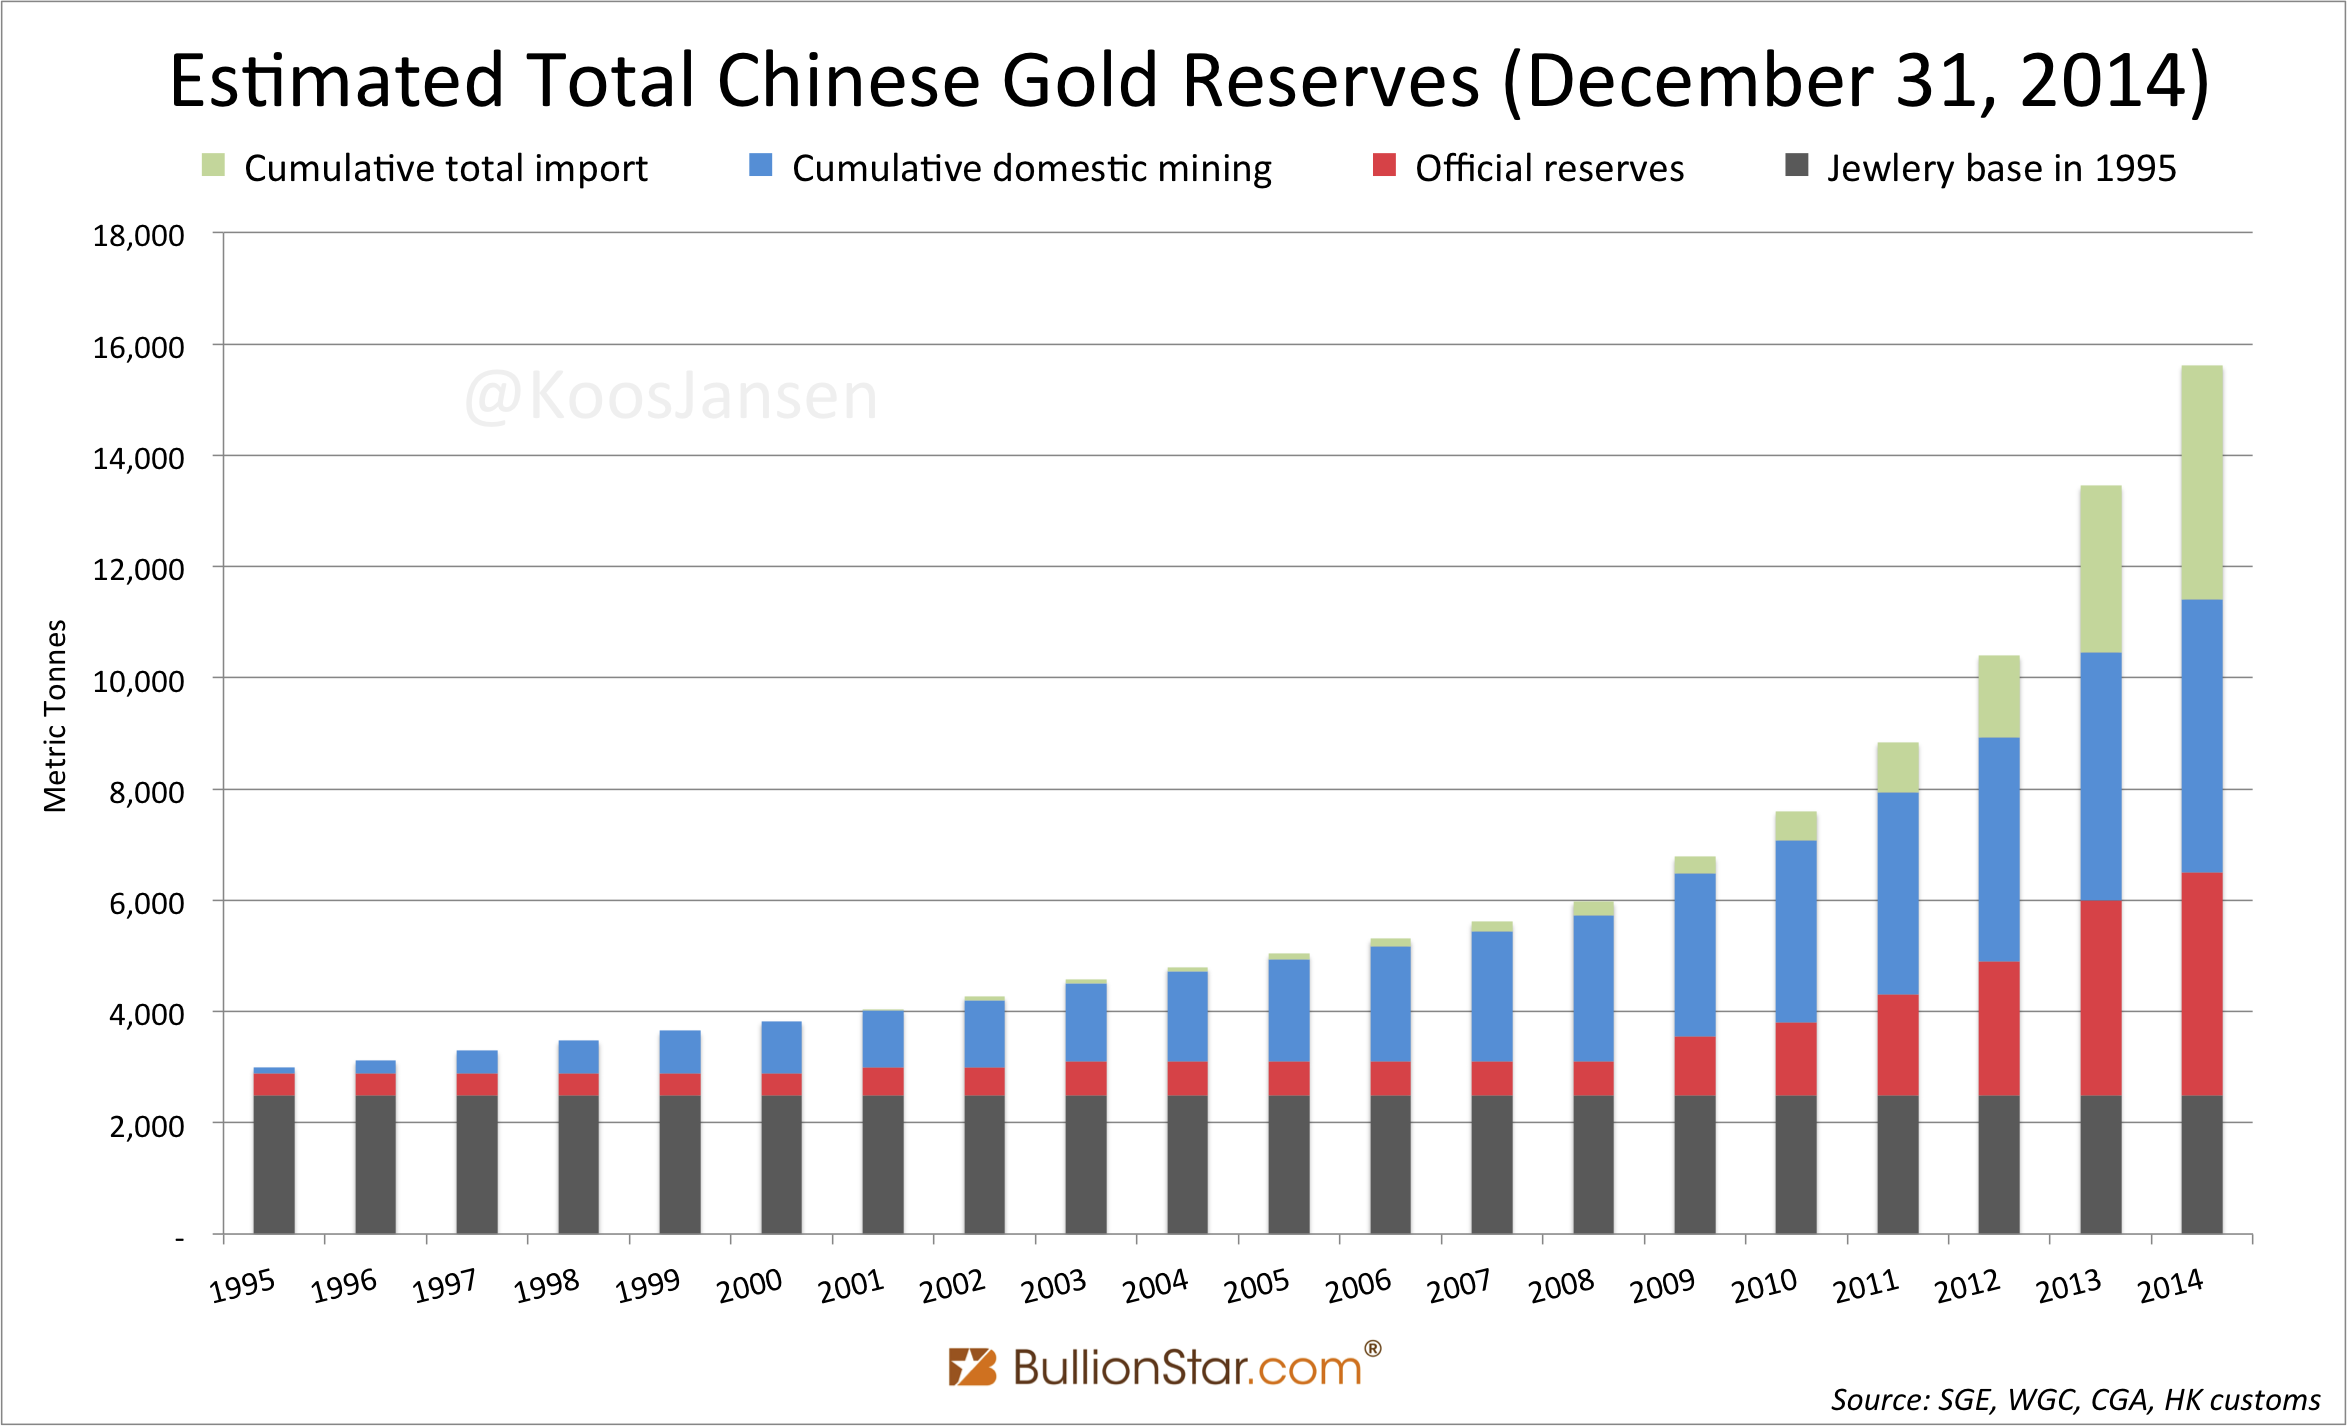 Total Estimated Chinese Gold Reserves 1995 - 2014